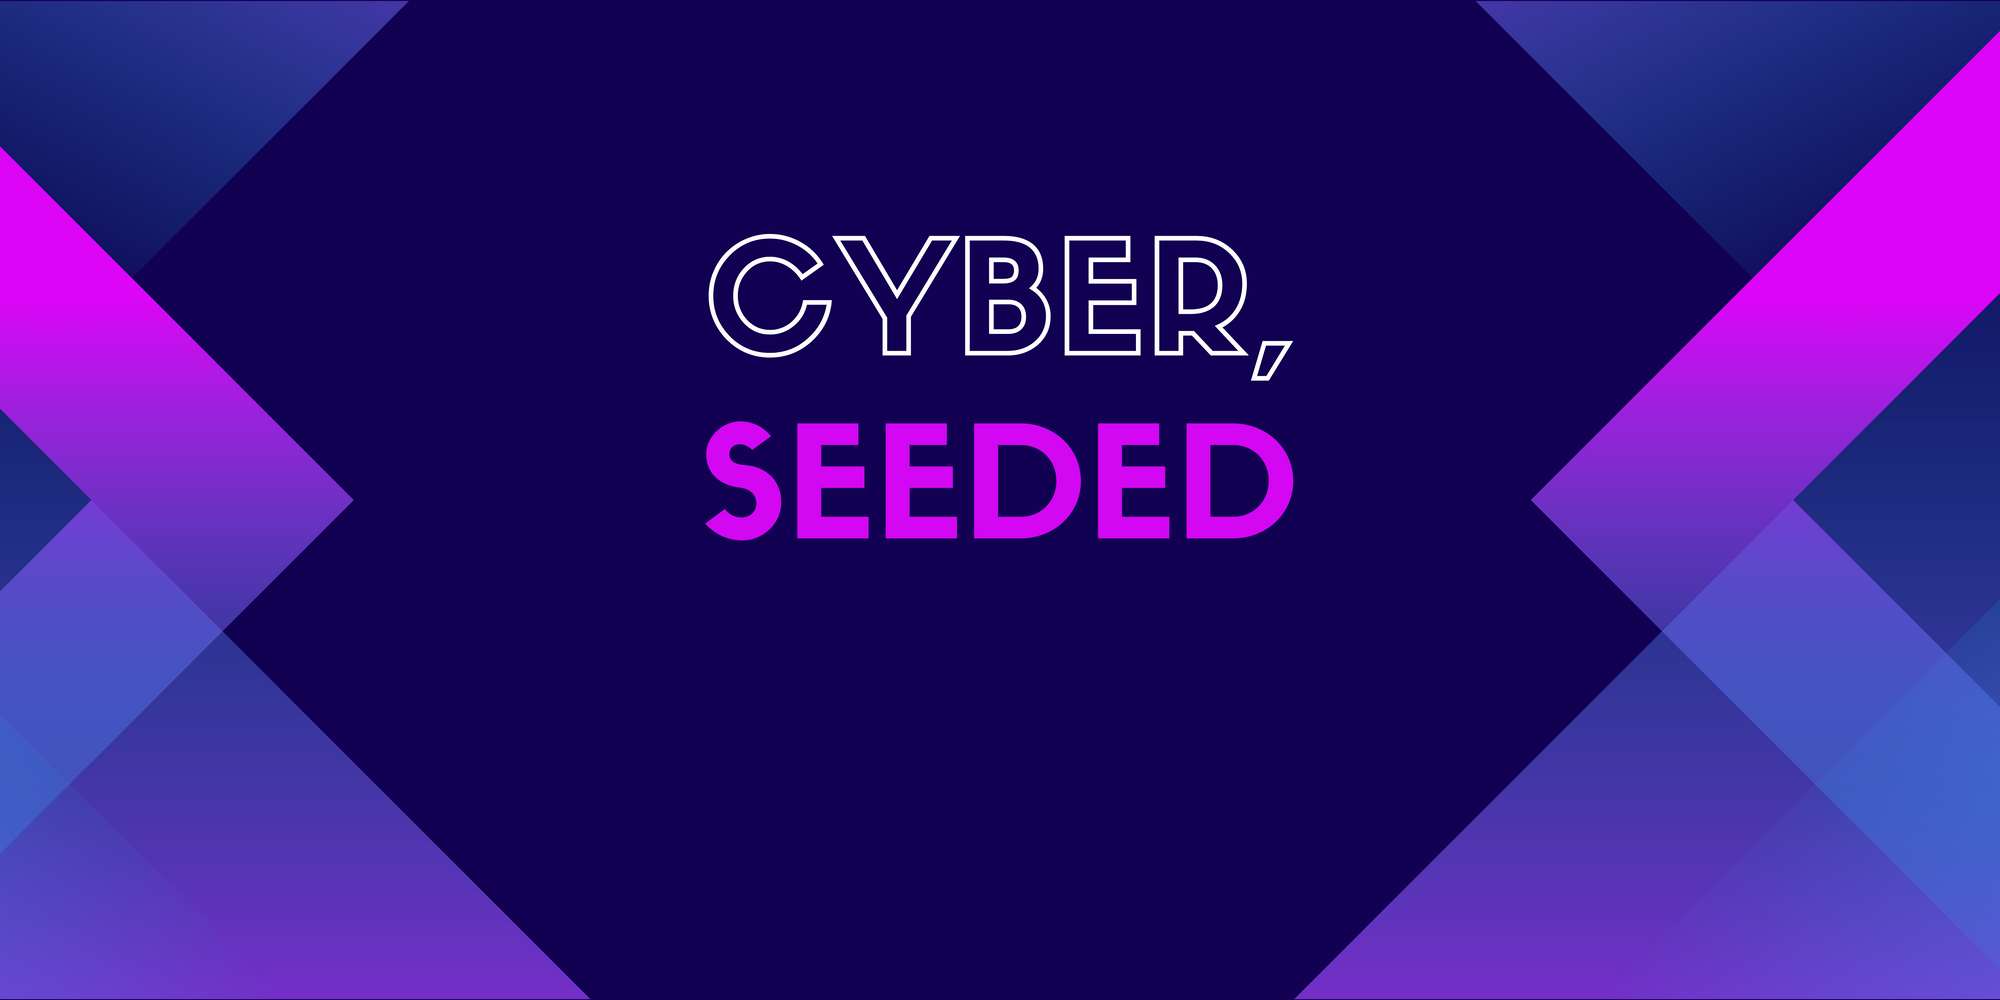 Cyber, Seeded tag feature image